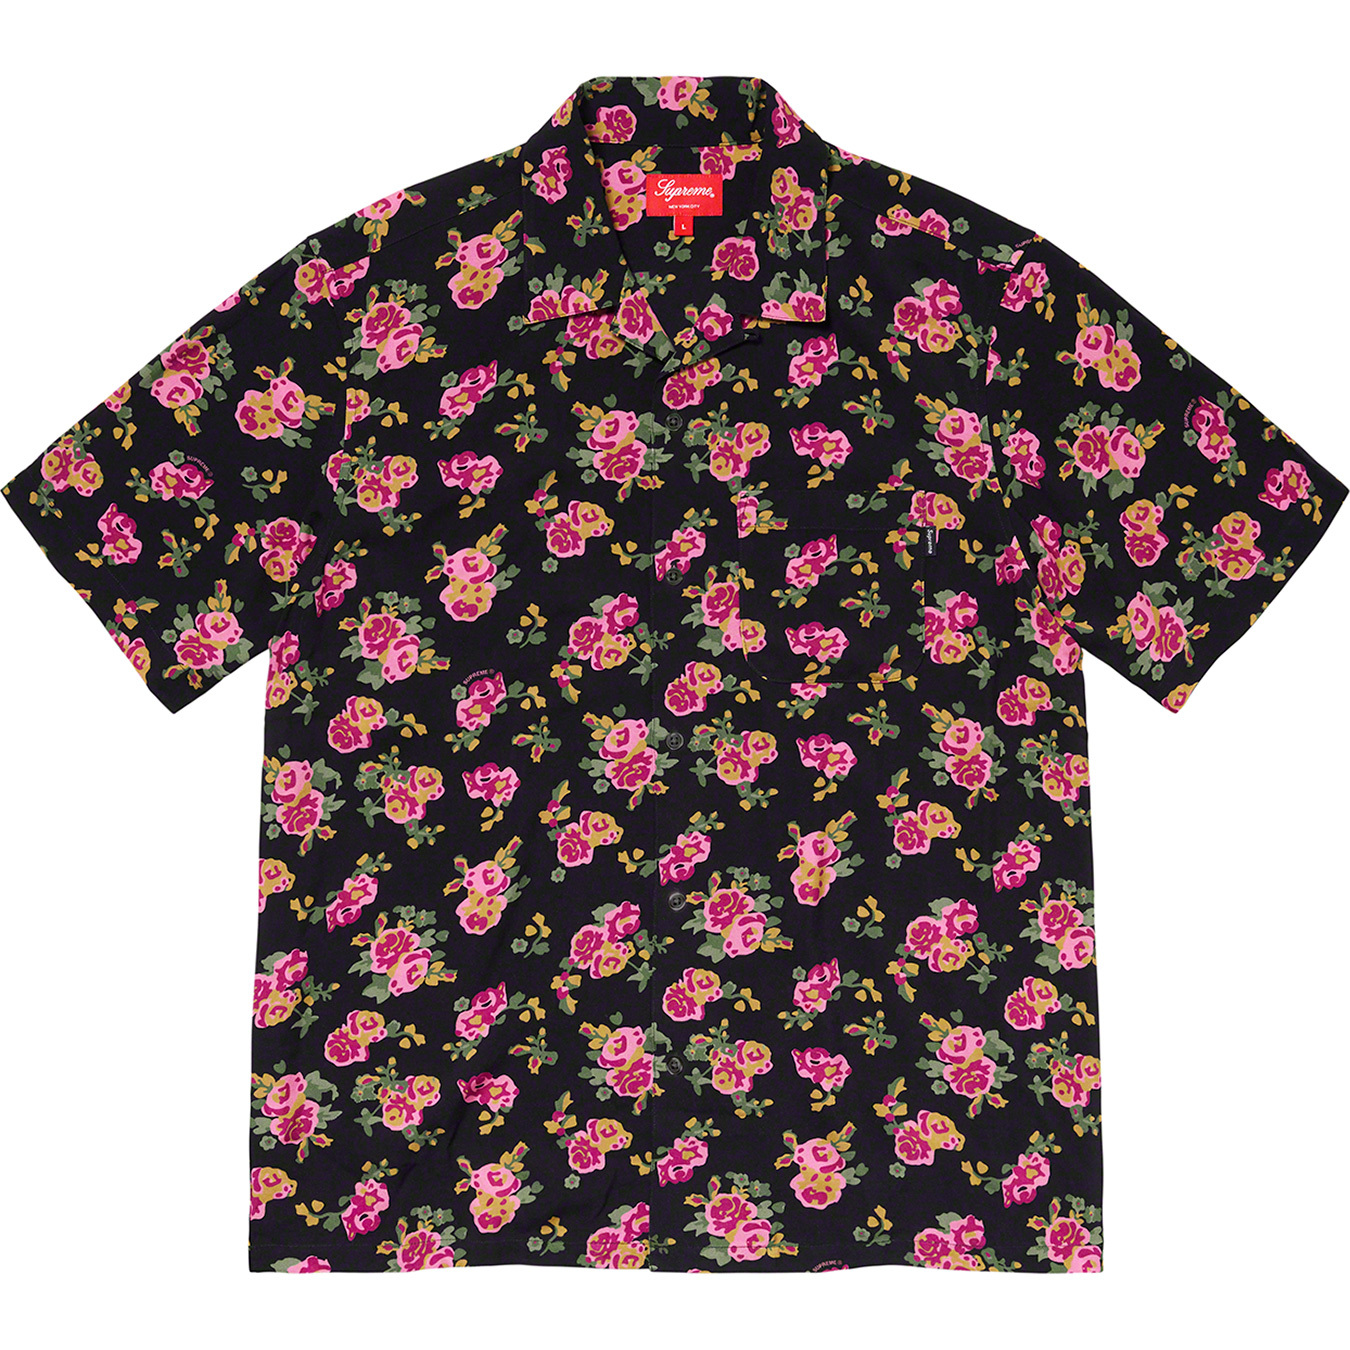 Floral Rayon S S Shirt - spring summer 2020 - Supreme